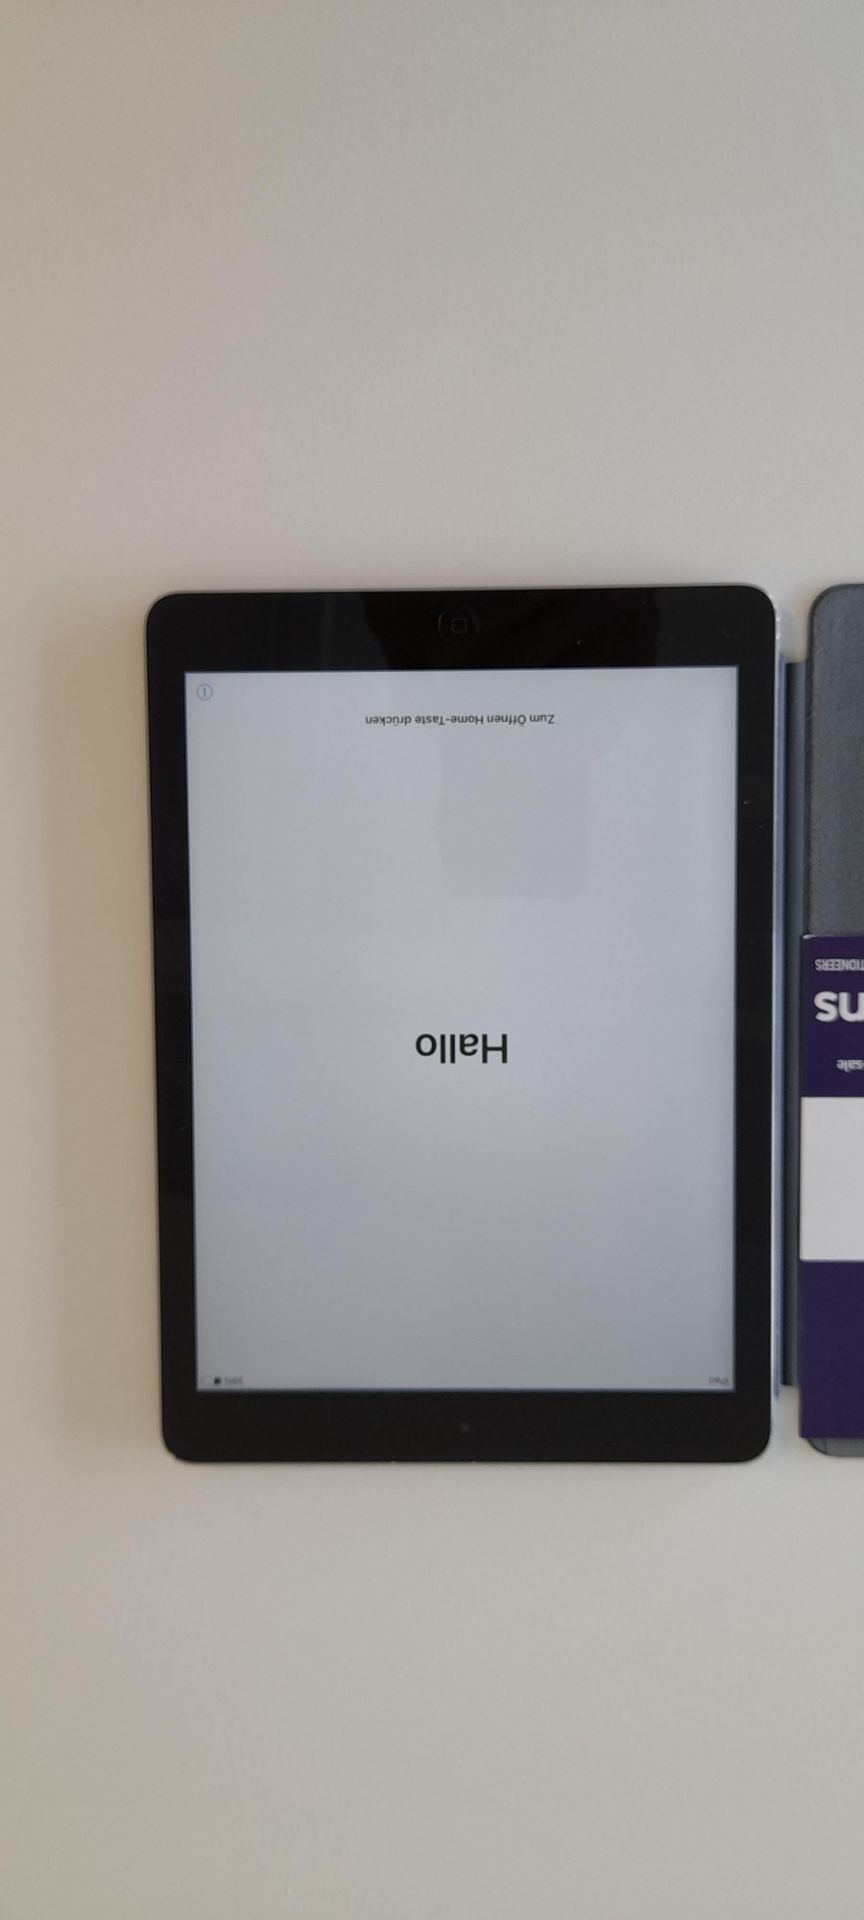 Apple iPad Air Wi-Fi, Model A1474, Space Grey. S/N DMPQL561FK129. Collection from Canary Wharf, - Image 2 of 6